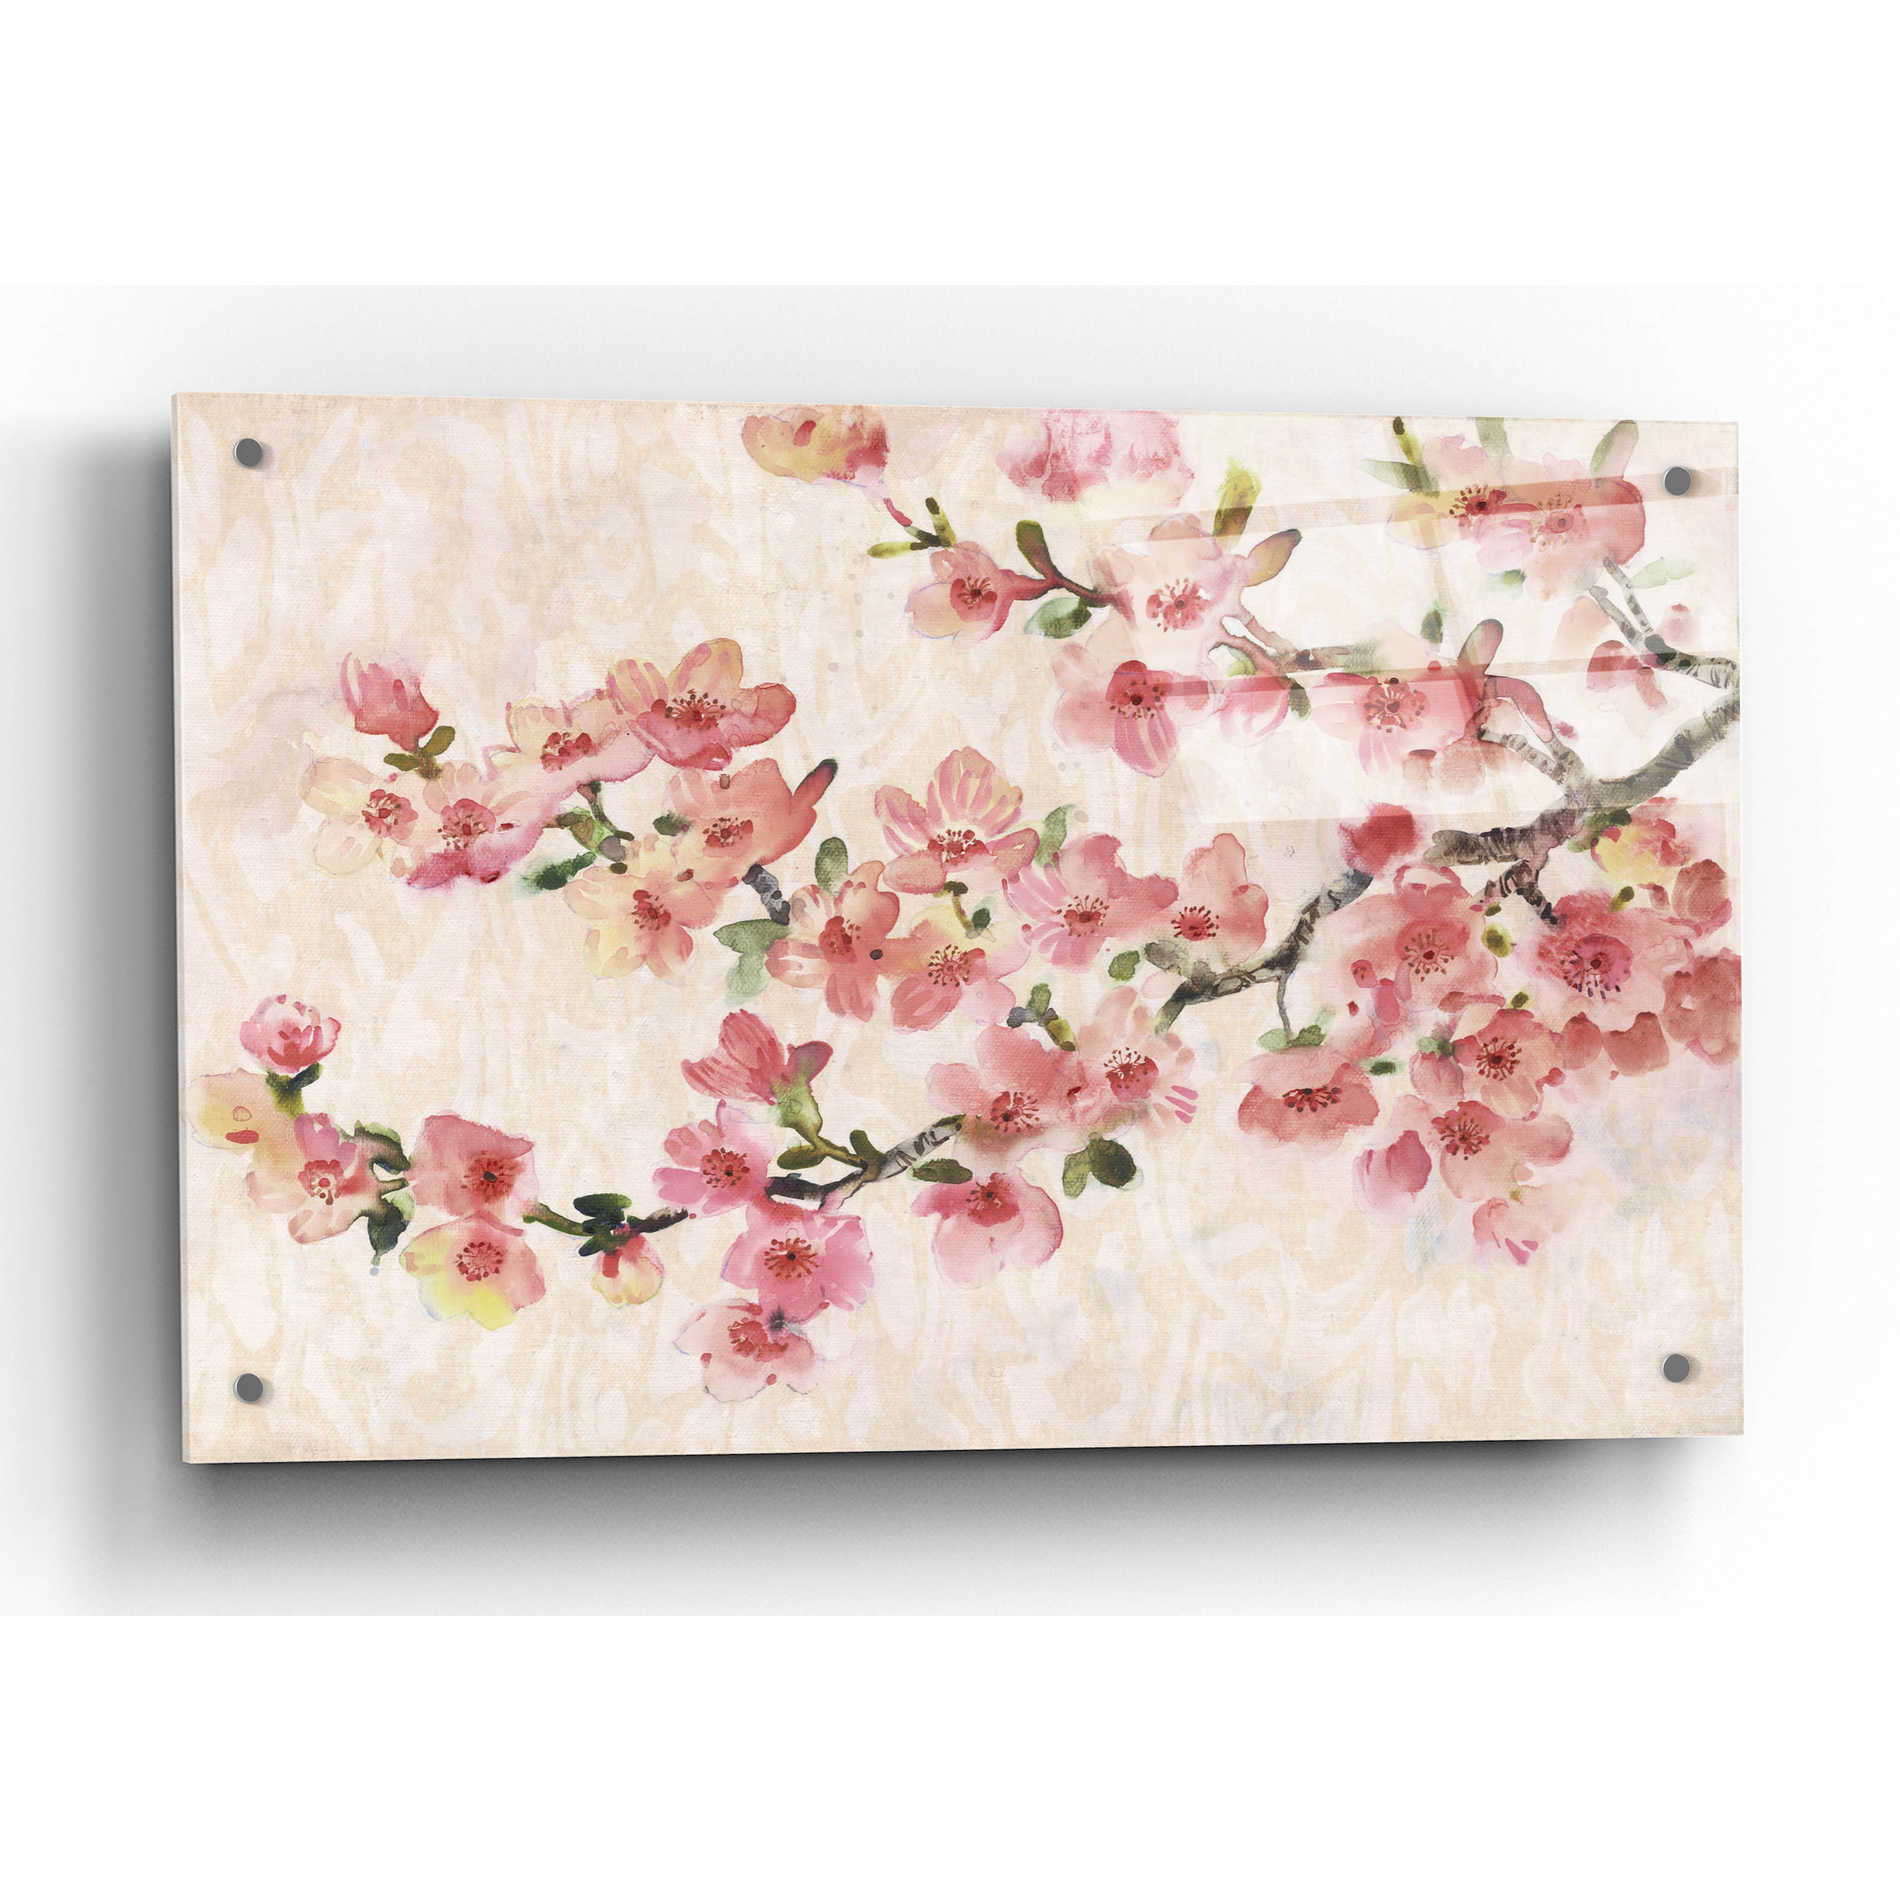 Epic Art 'Cherry Blossom Composition I' by Tim O'Toole, Acrylic Glass Wall Art,36x24